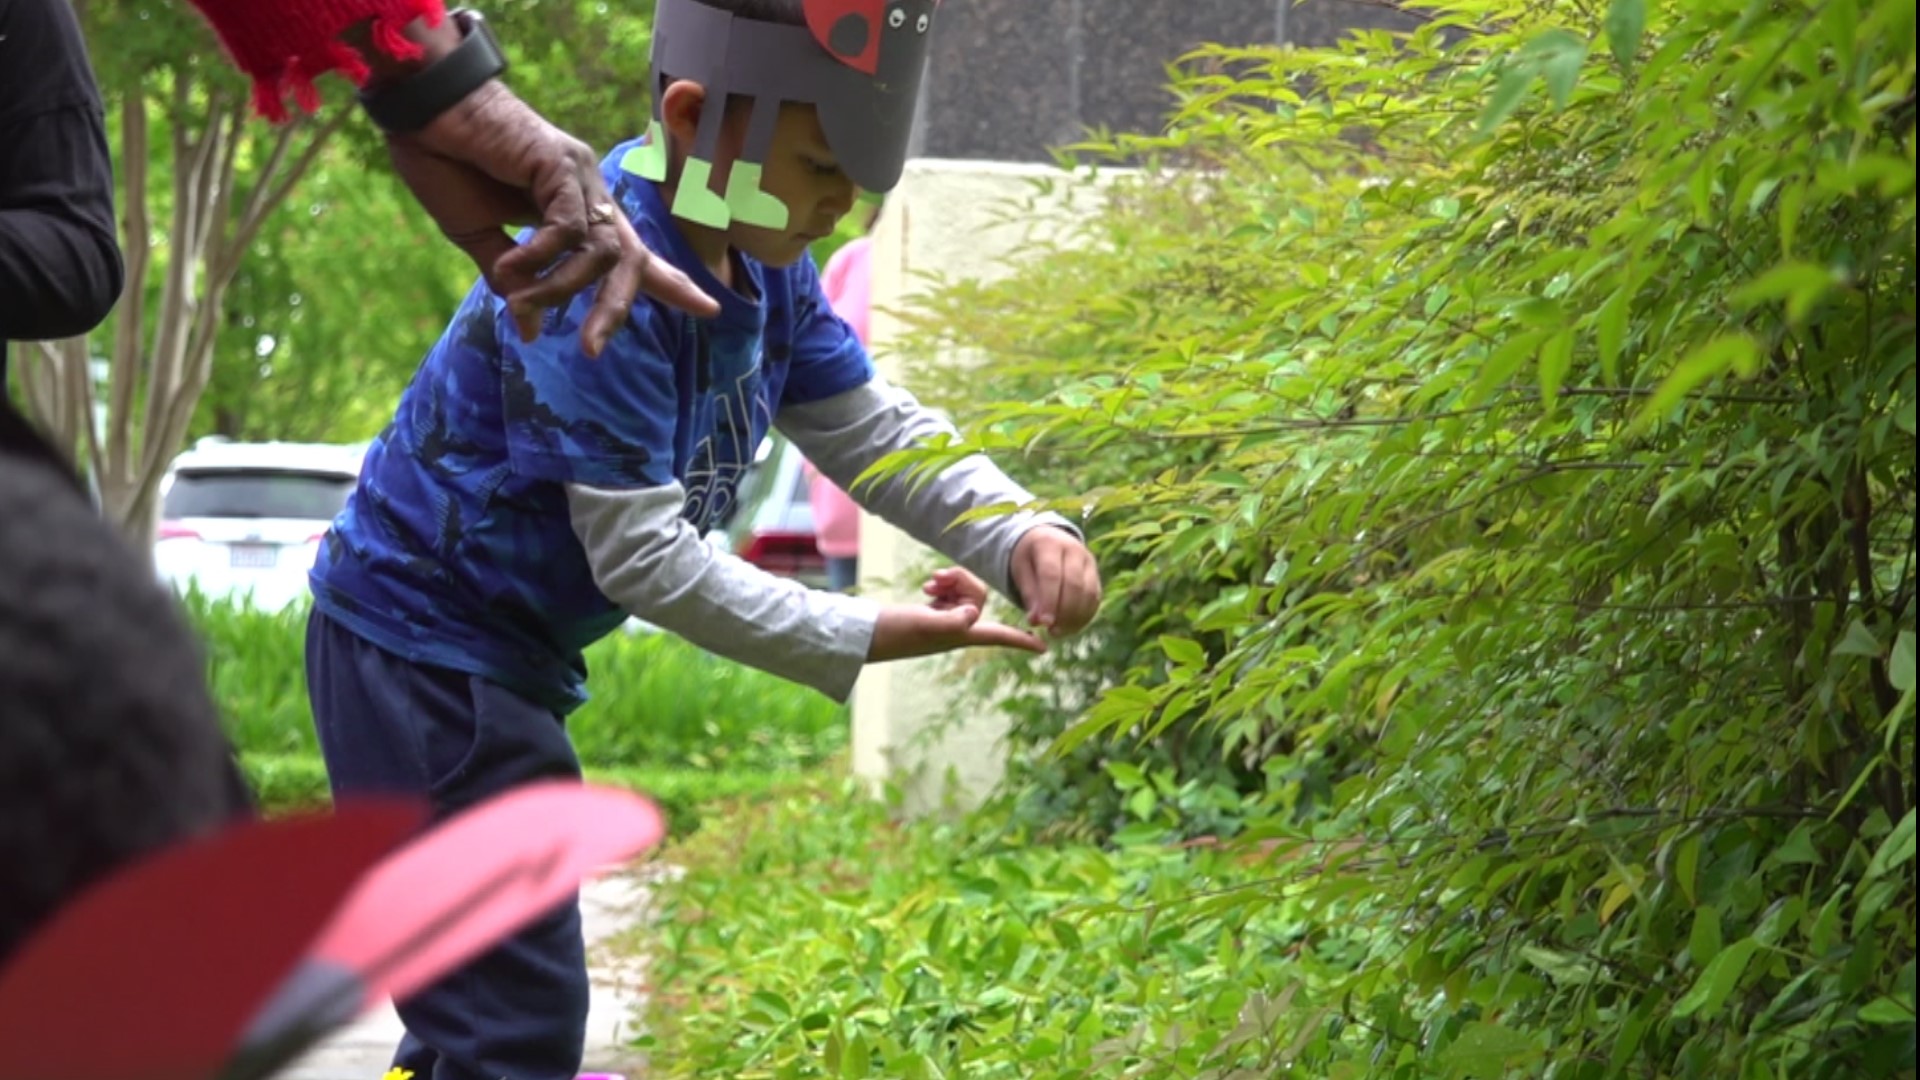 As part of their Earth Day celebrations, students of Stockton's Merryhill Preschool released over 2,500 ladybugs Thursday morning, taking the classroom outside.